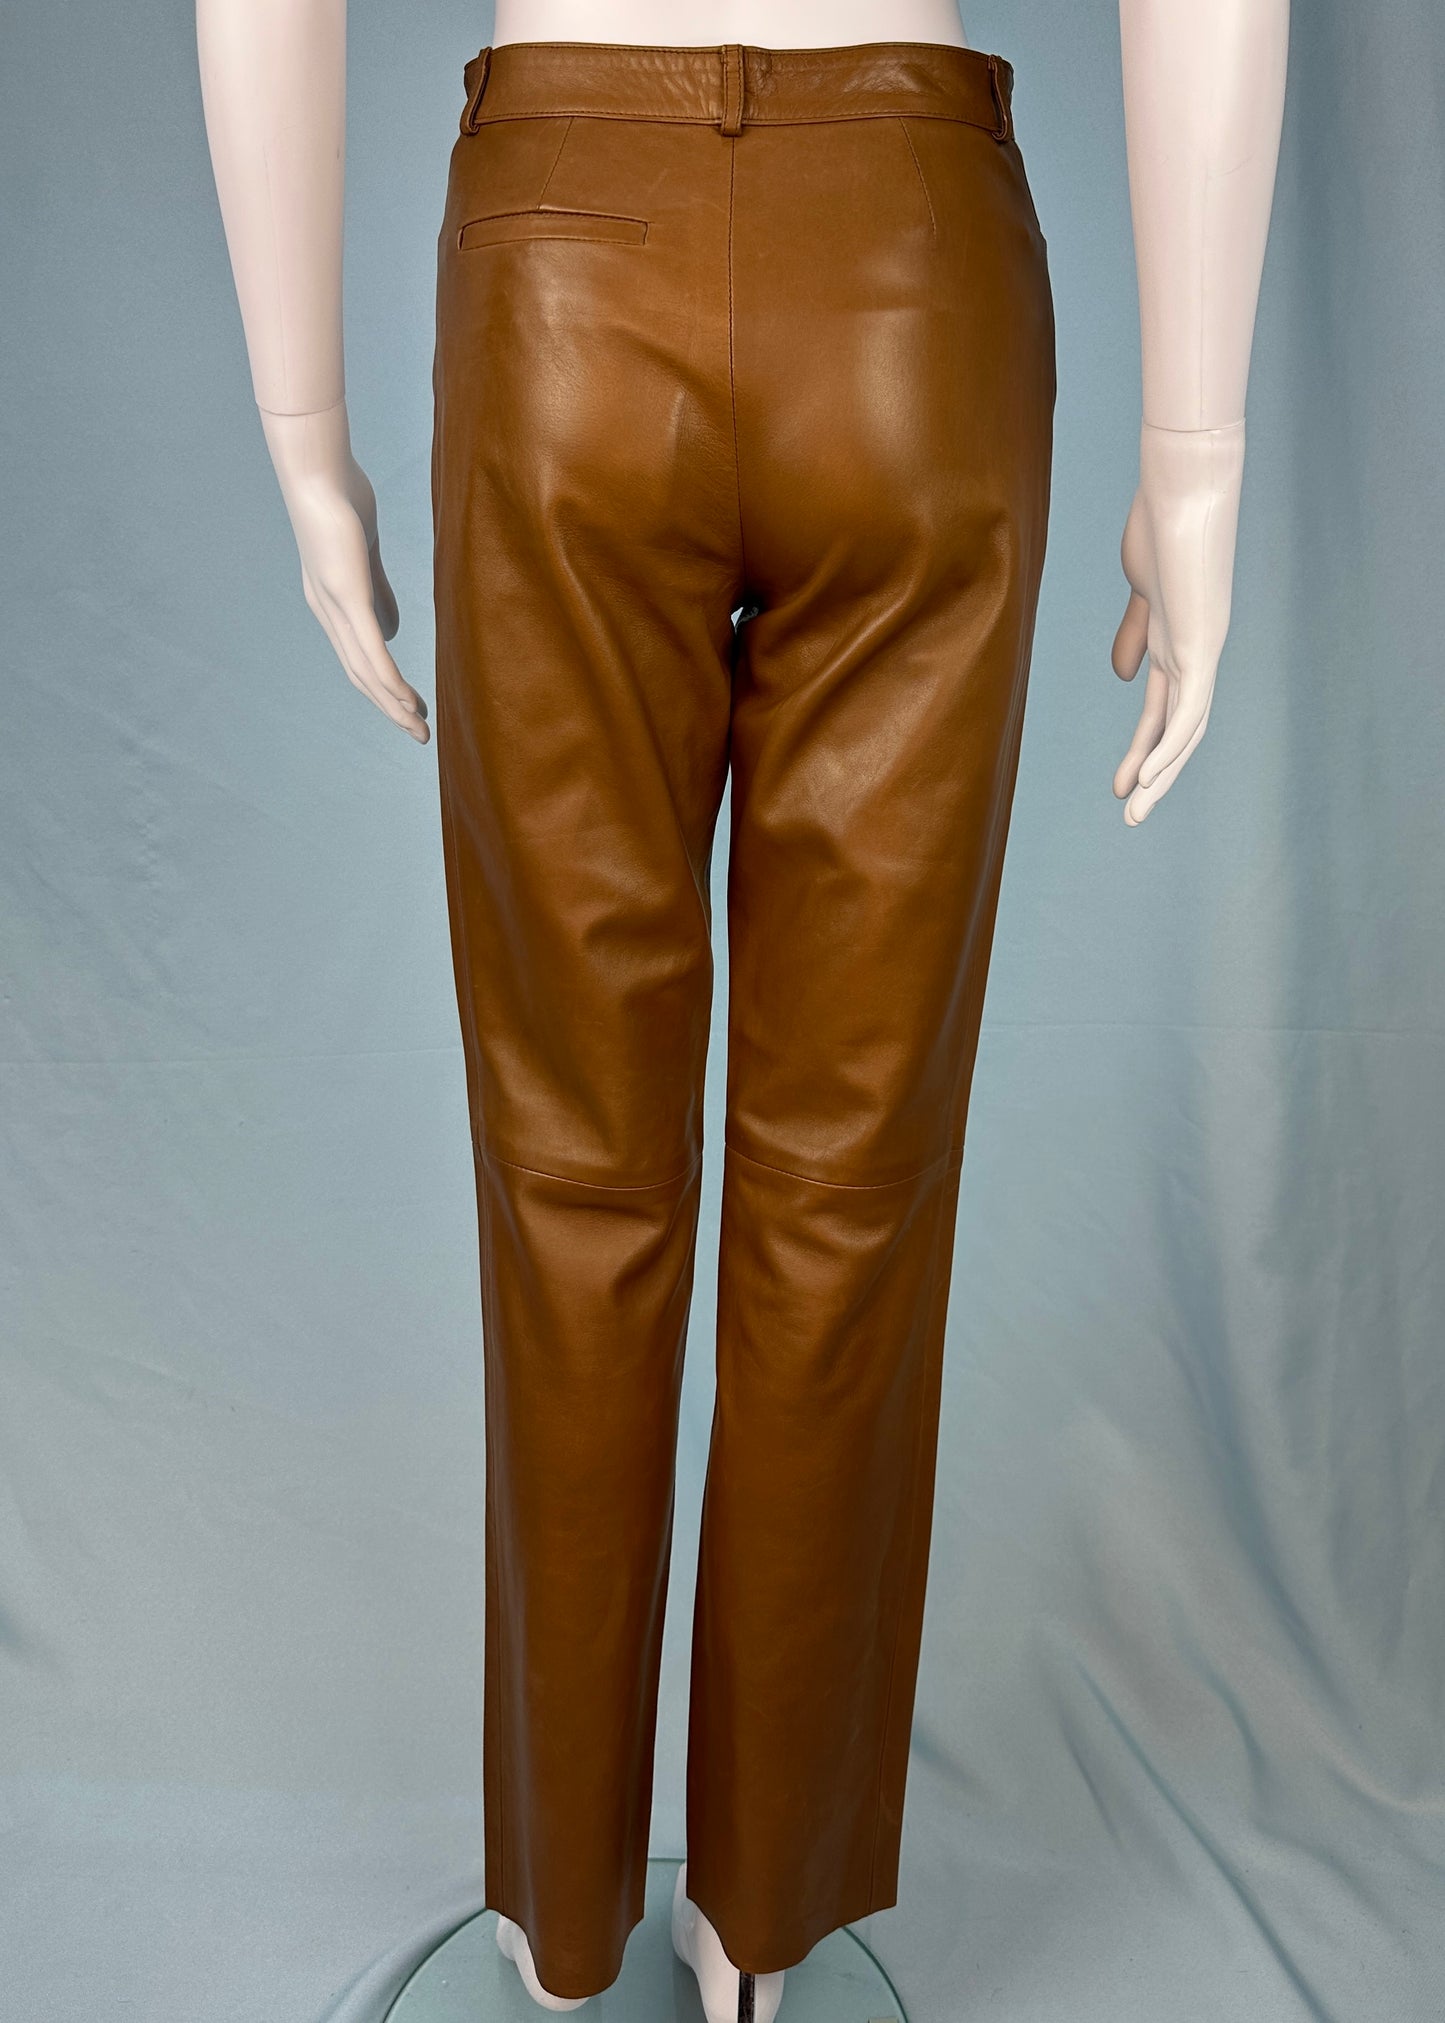 Gucci Brown Leather High Waisted Pants